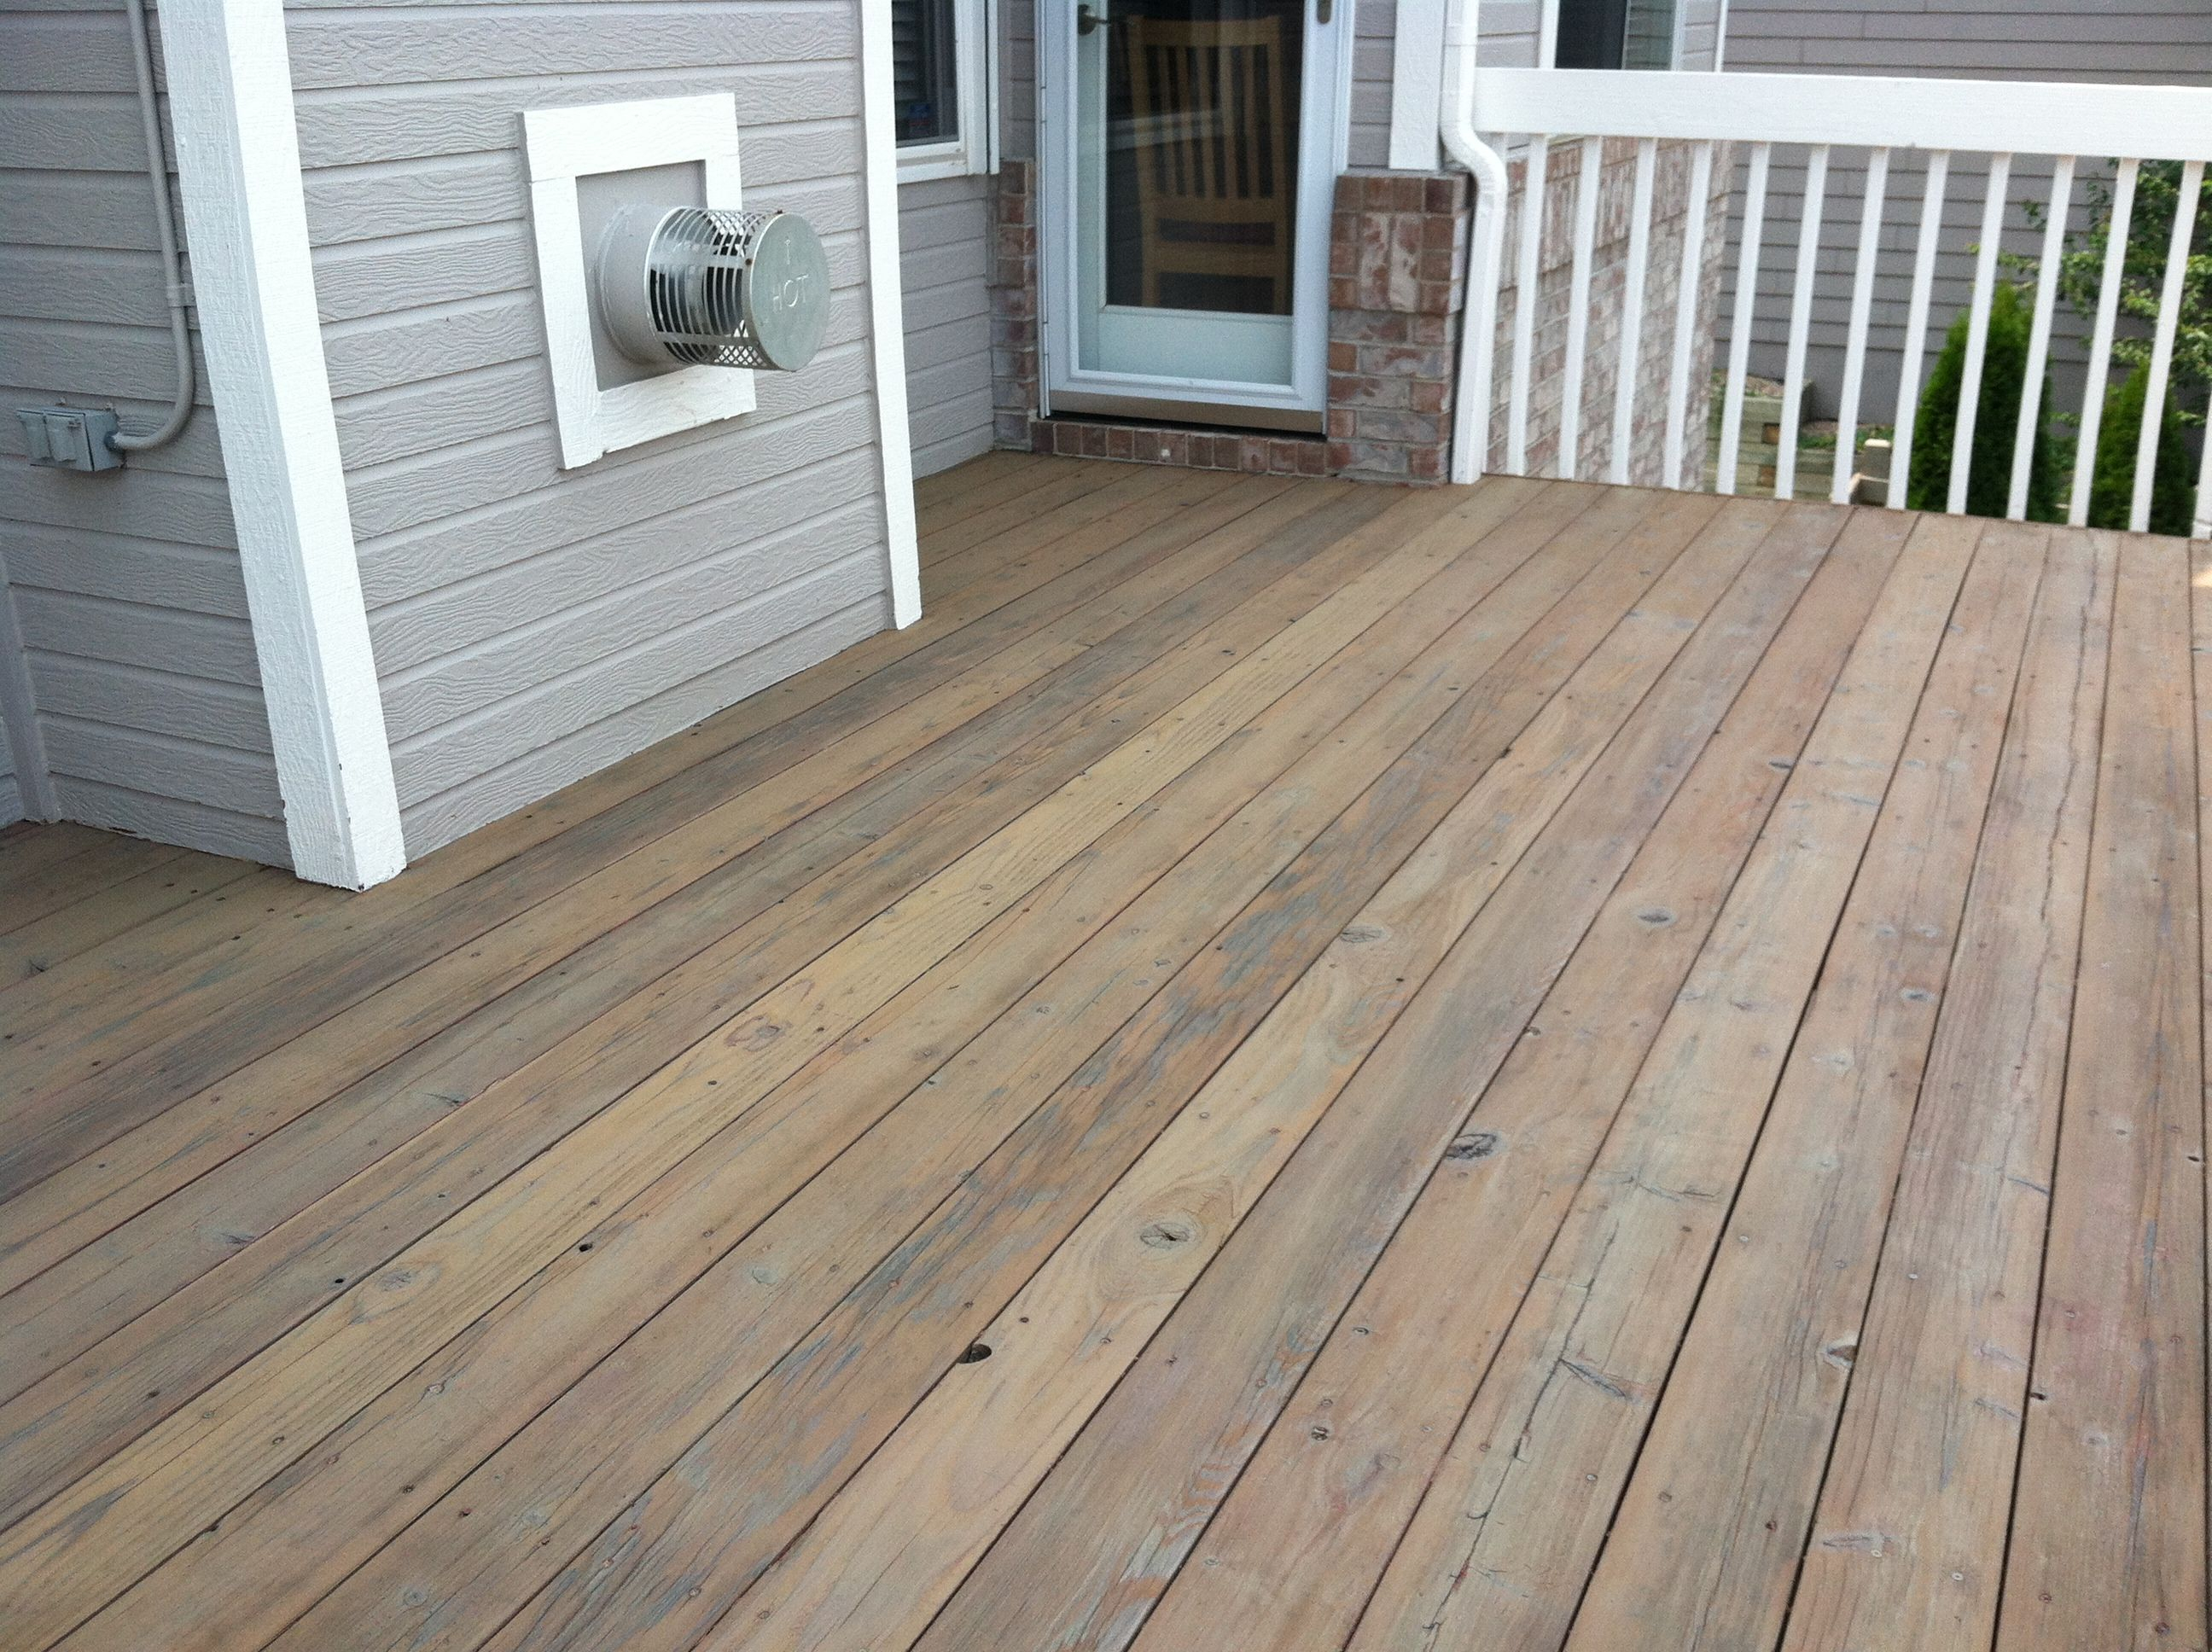 Cabot Deck Stain In Semi Transparent Taupe Best Deck Stains Deck Throughout Measurements 2592 X 1936 